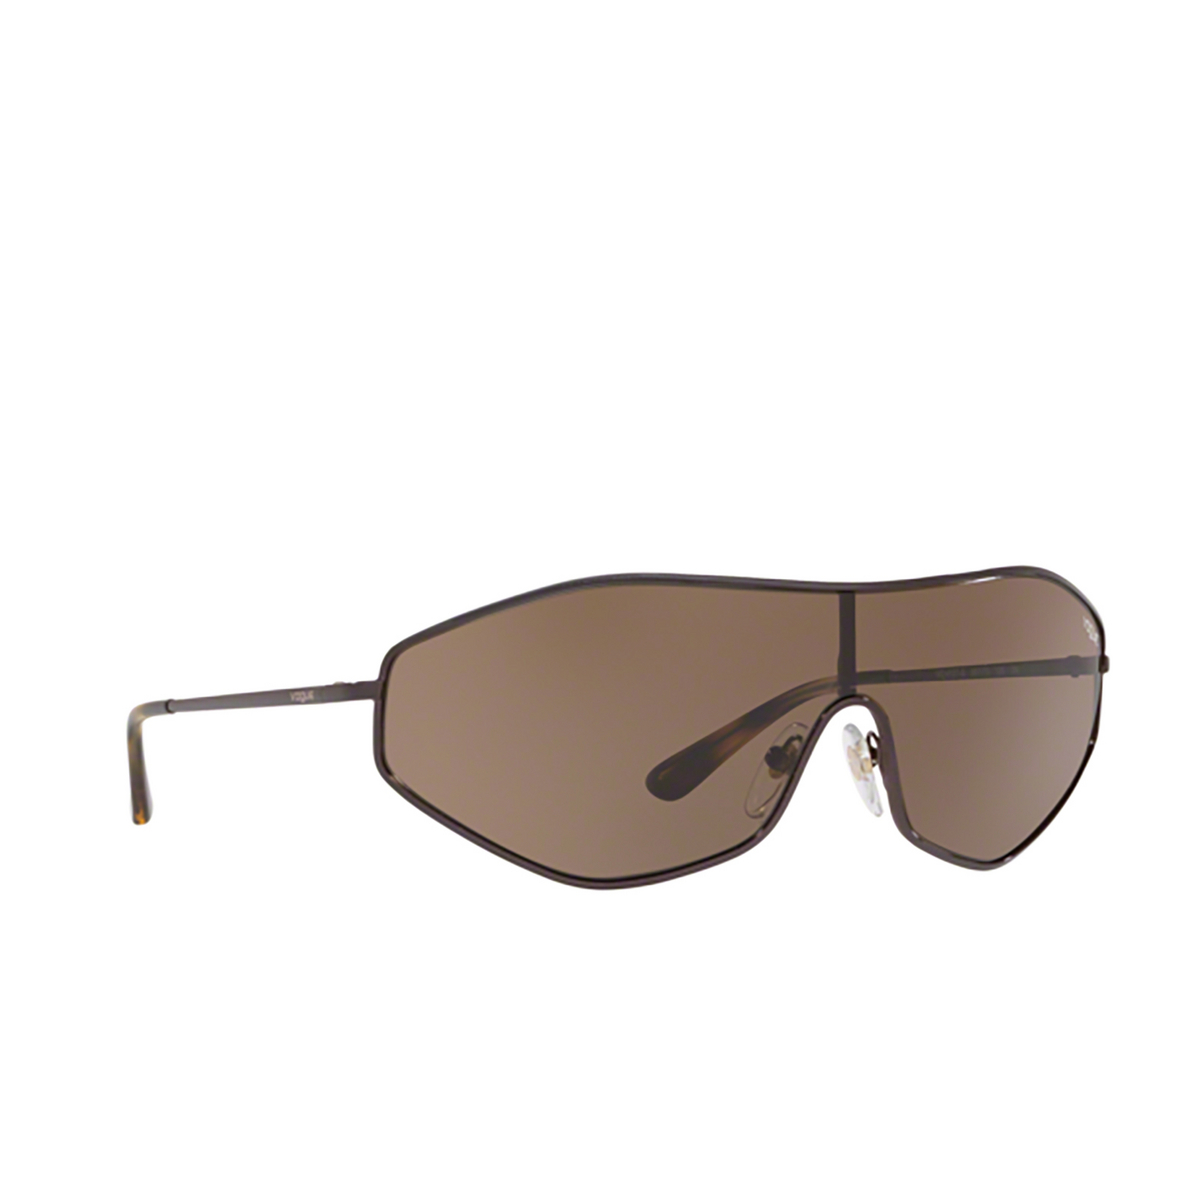 Vogue® Mask Sunglasses: G-vision VO4137S color Brown 997/73 - three-quarters view.